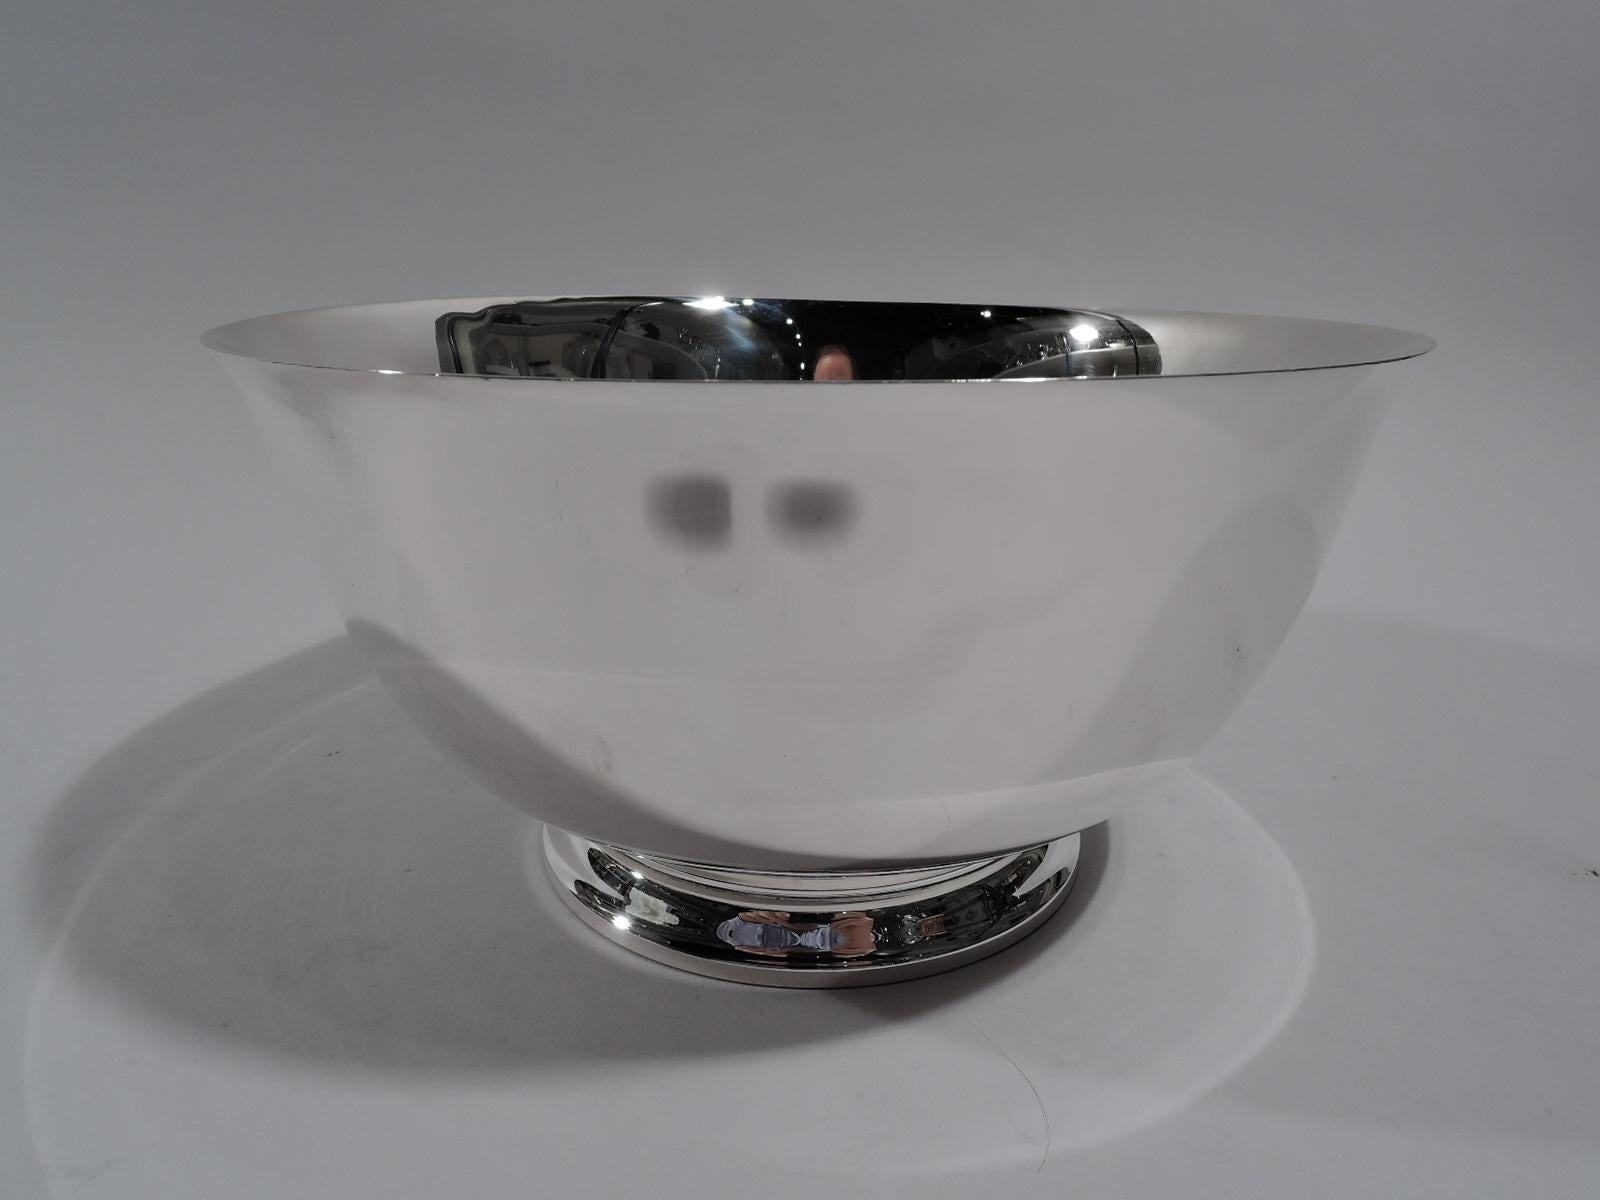 Colonial Revival sterling silver bowl. Made by Watson Company in Attleboro, Mass.,circa 1930. Round and curved with flared rim and round and stepped foot. Lots of room for engraving. Fully marked including no. B264 and phrase “Exemplar / Paul Revere